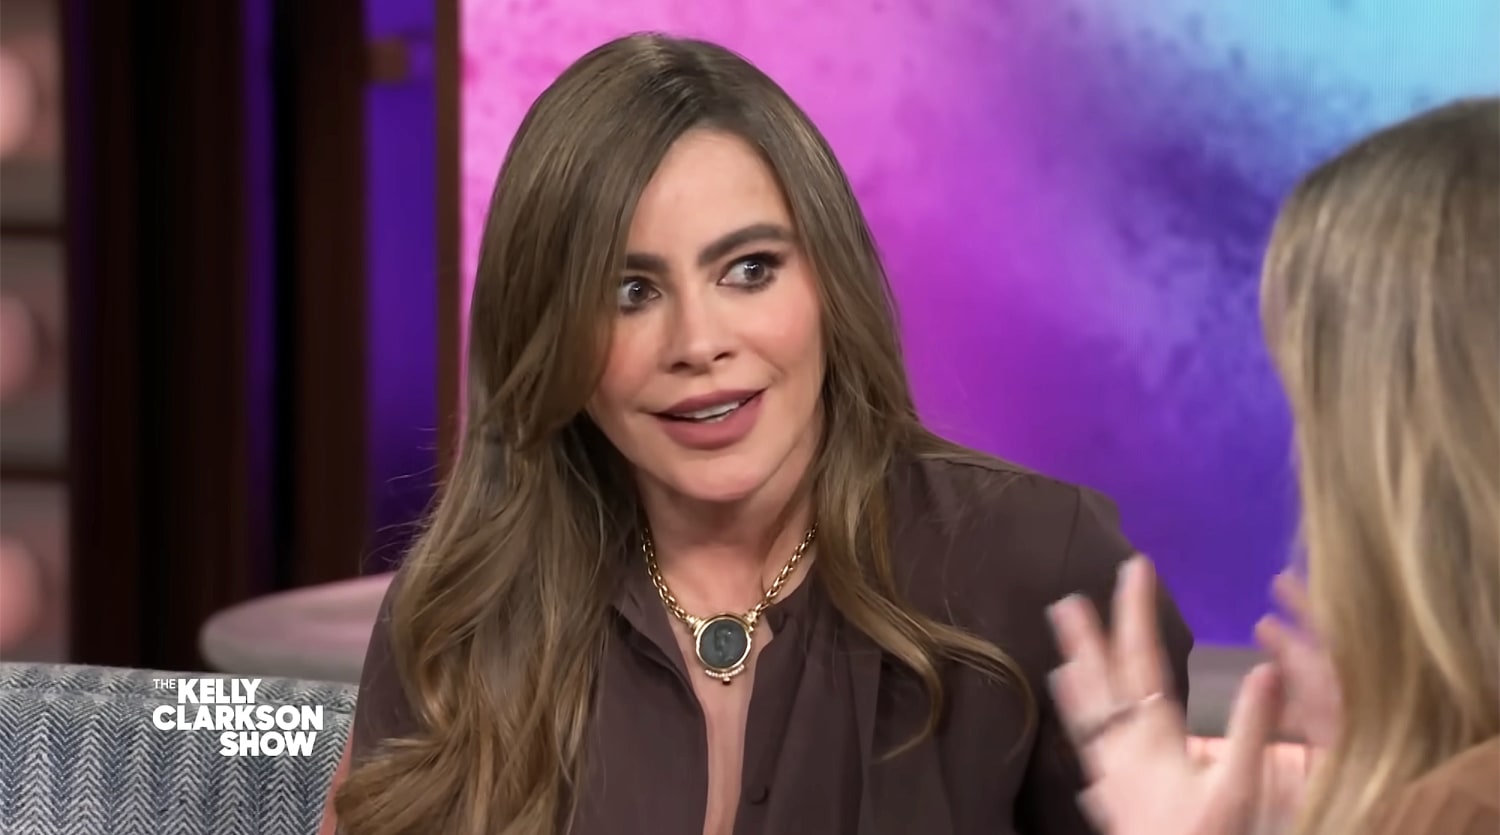 Did Sofia Vergara Get A Facelift? Here's Why The Internet Thinks